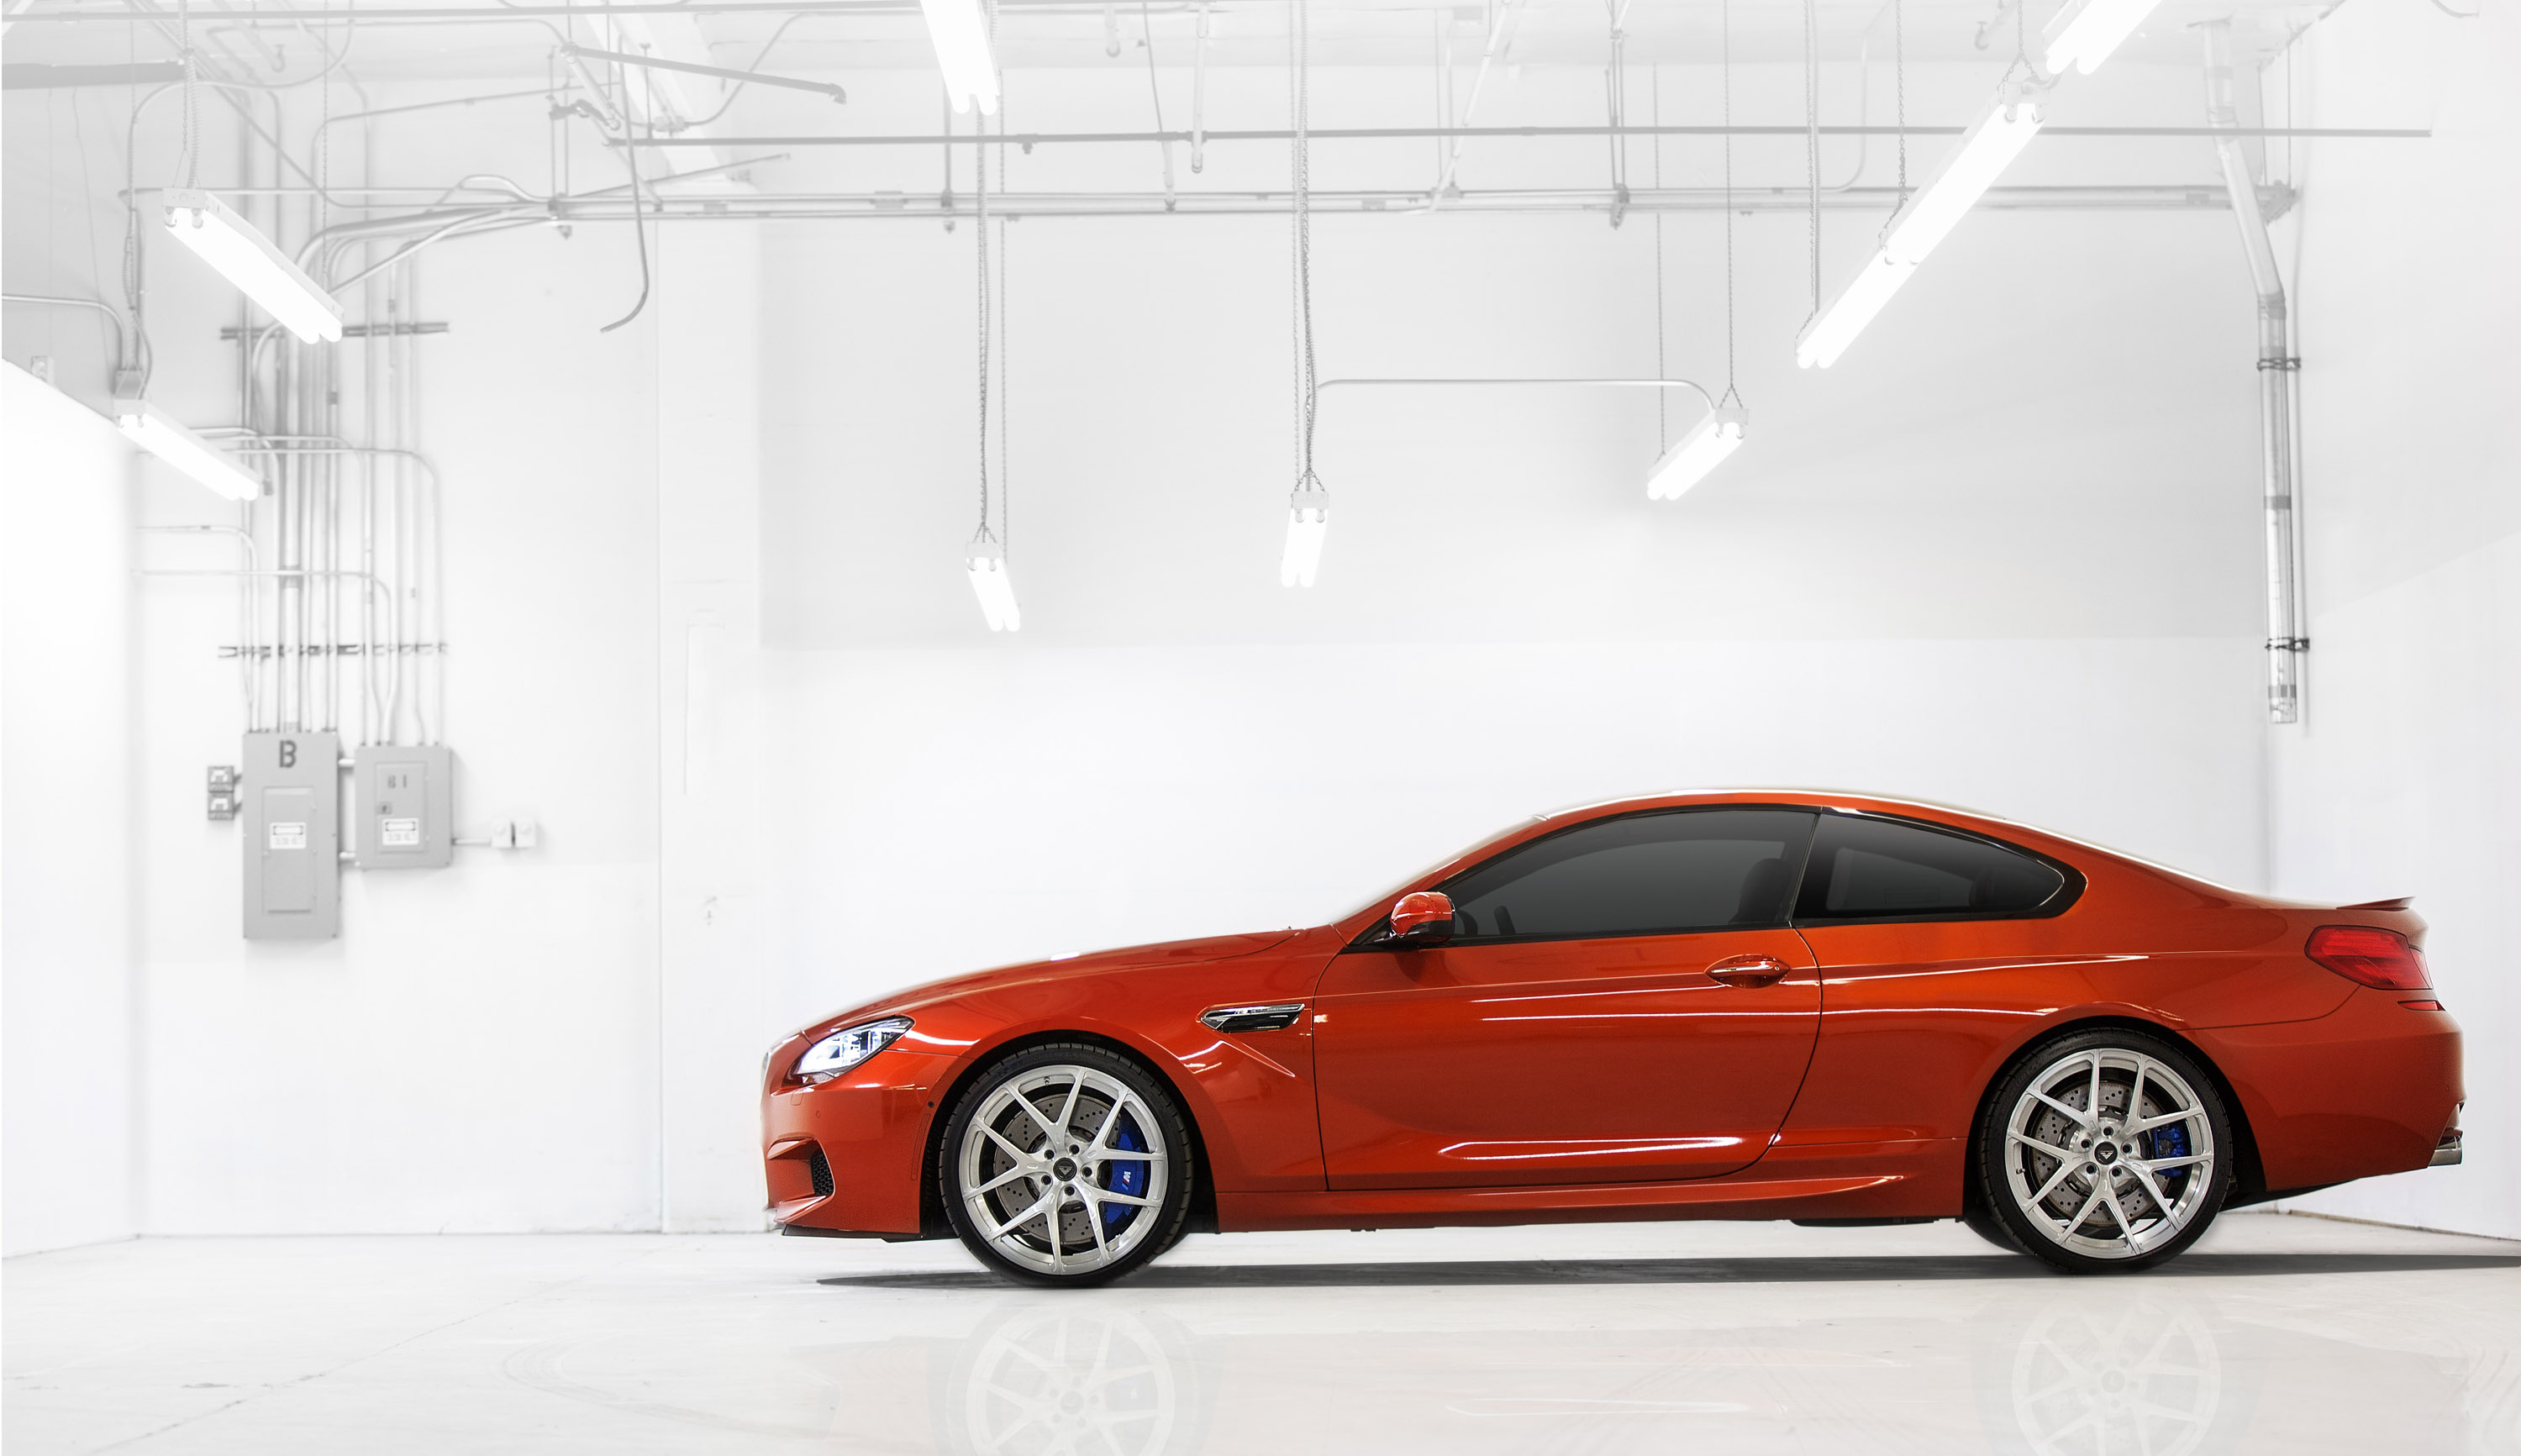 2013, Vorsteiner, Bmw, M6 coupe, Vs 110, Coupe, Tuning Wallpaper